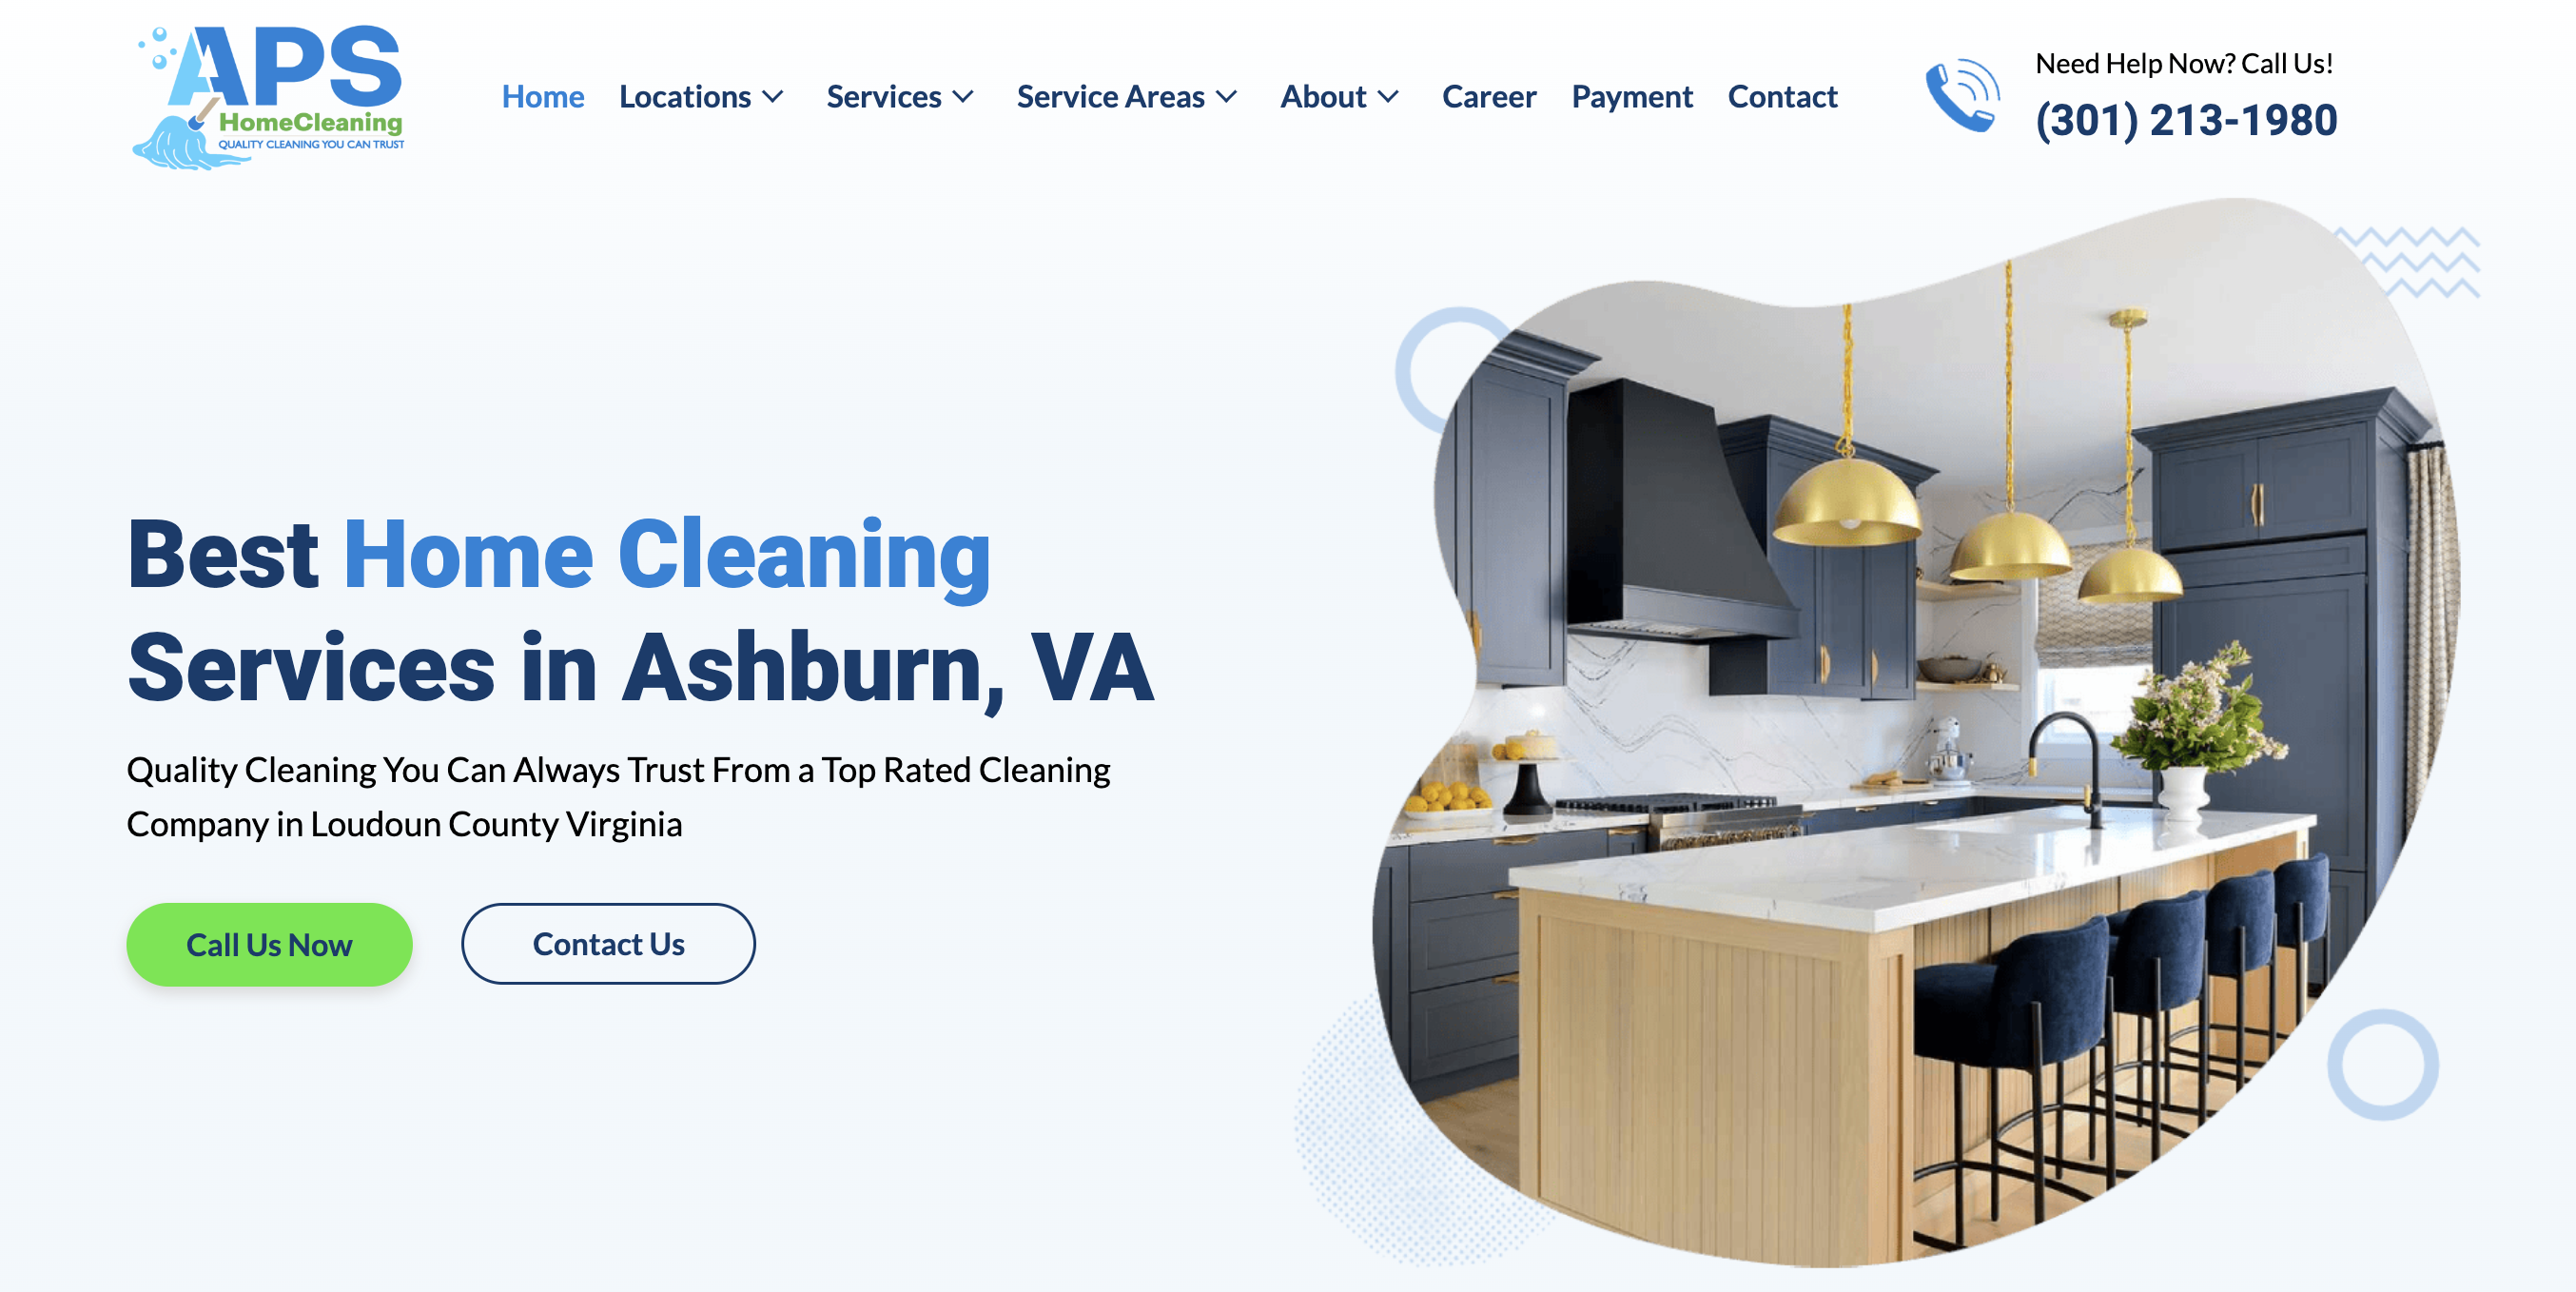 APS home Cleaning